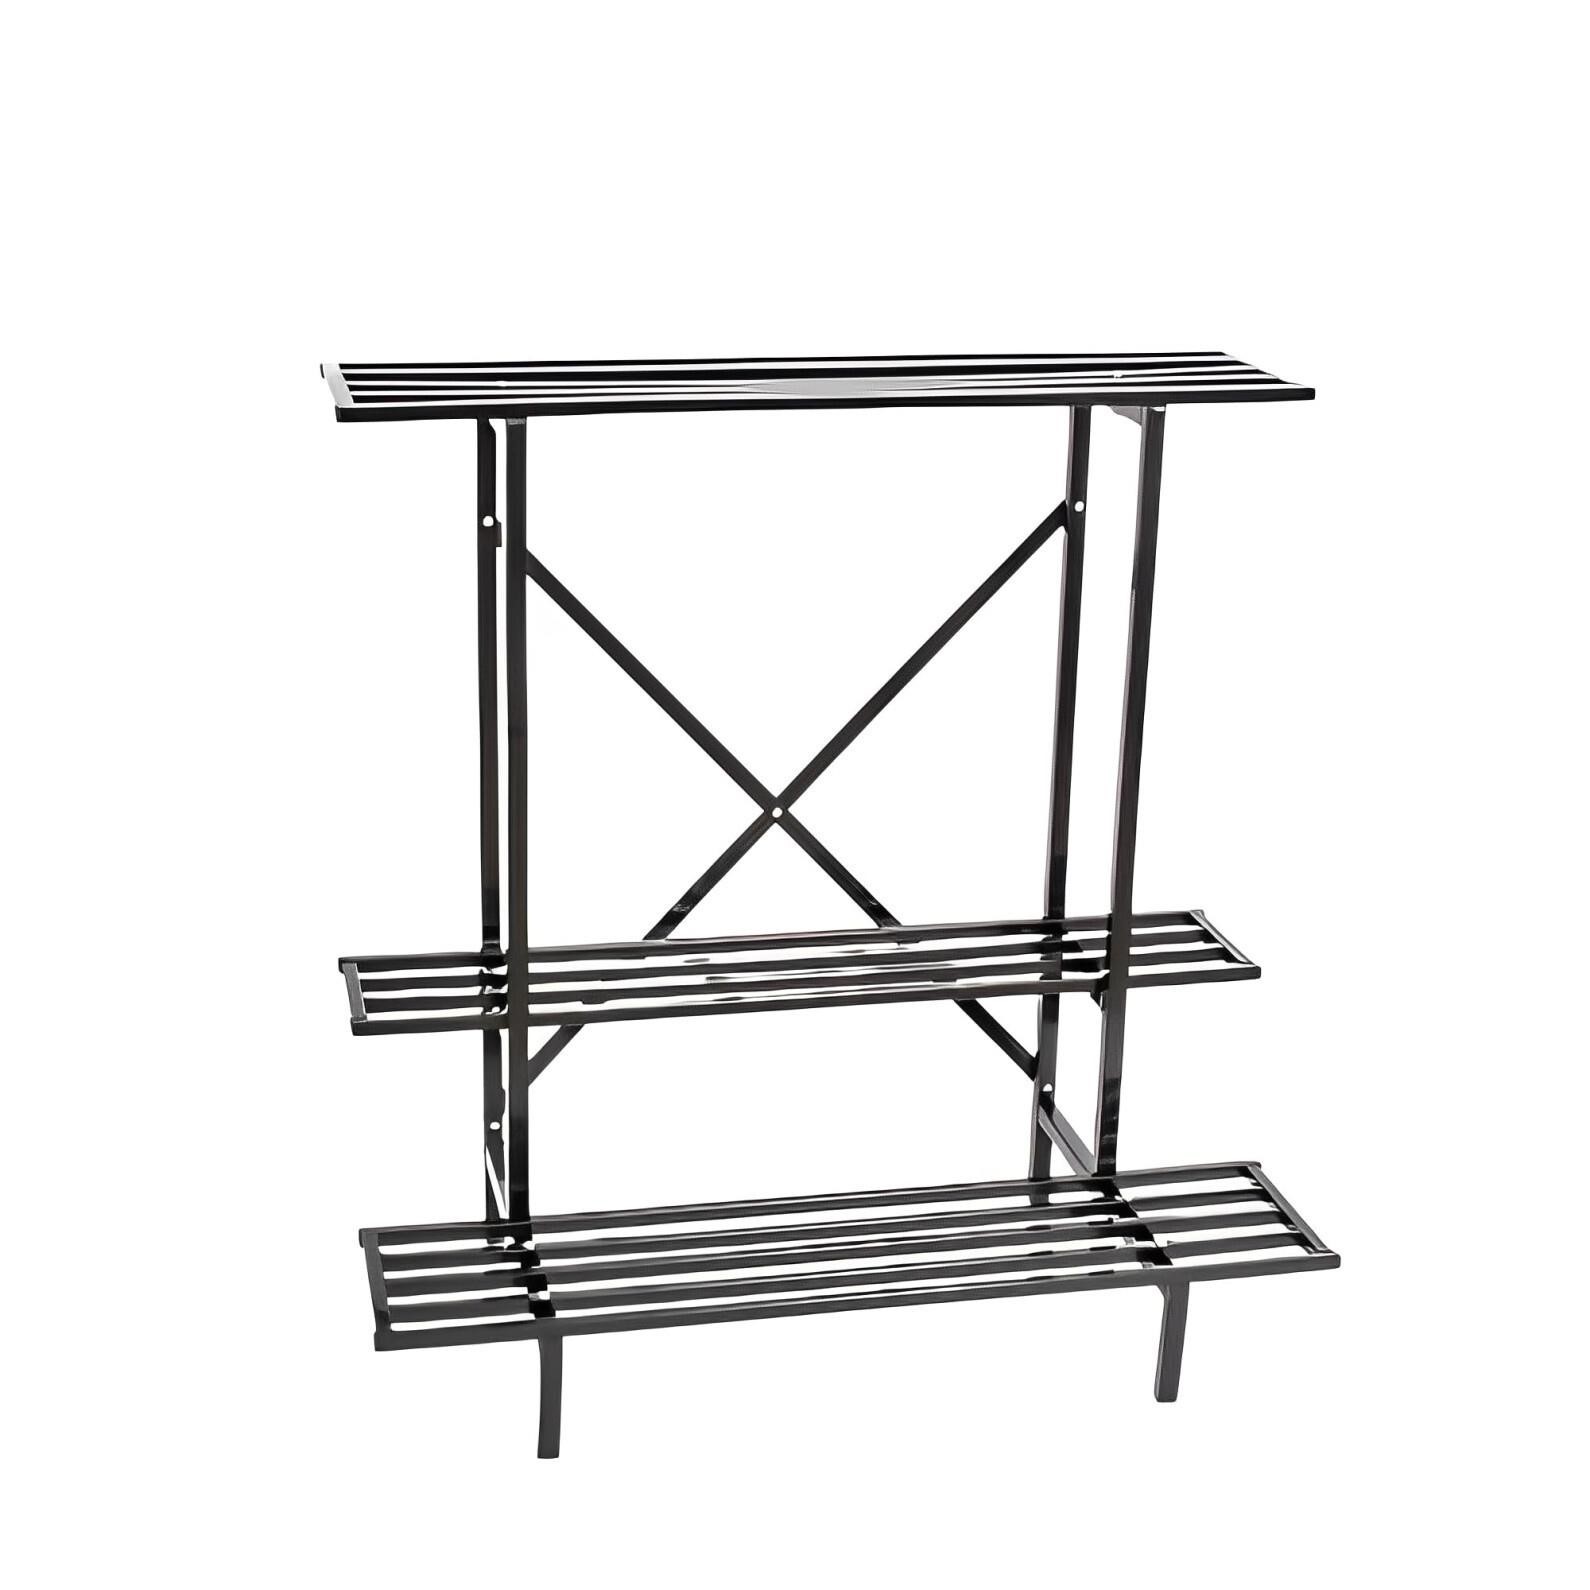 LX3 Brands 3 Tier Plant Stand | Heavy Duty Plant S